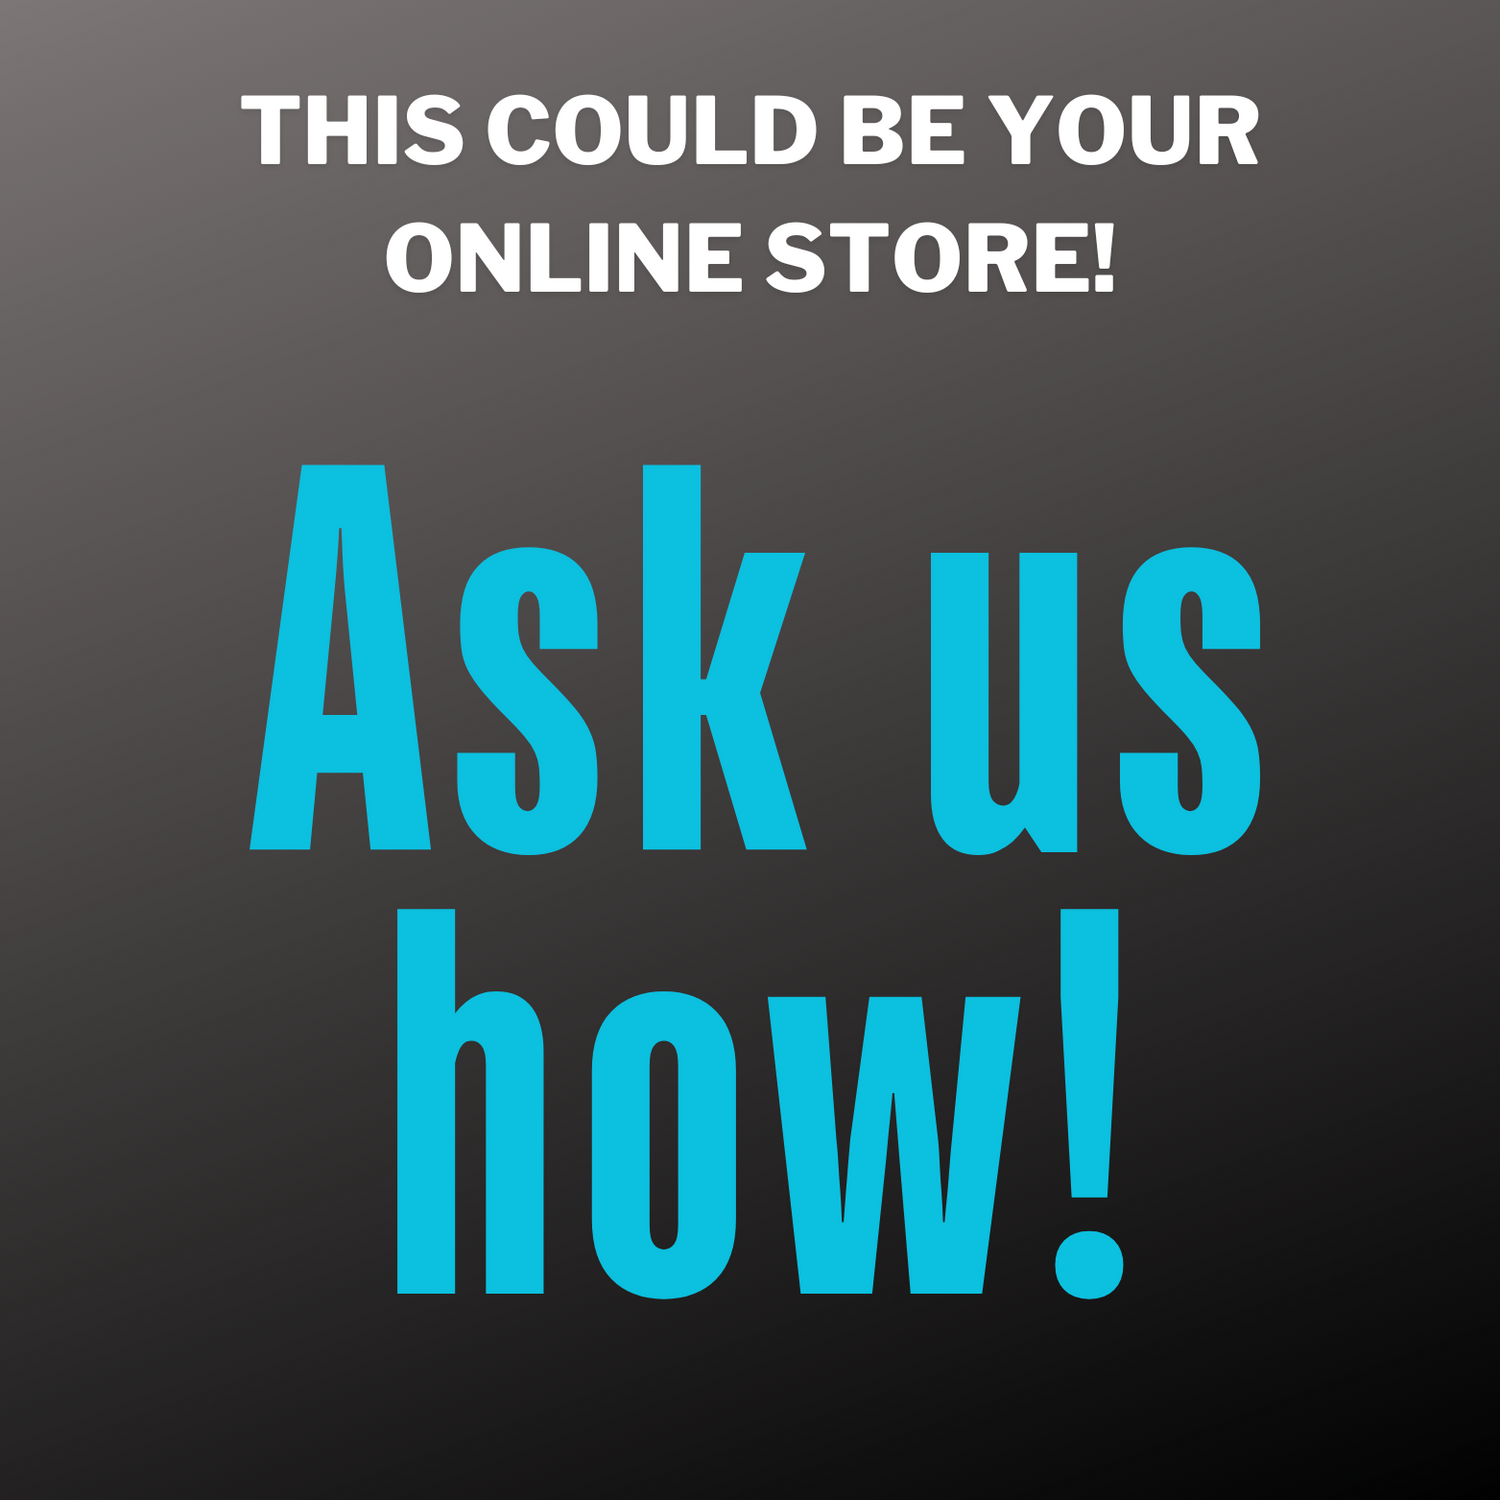 THIS COULD BE YOUR ONLINE STORE!